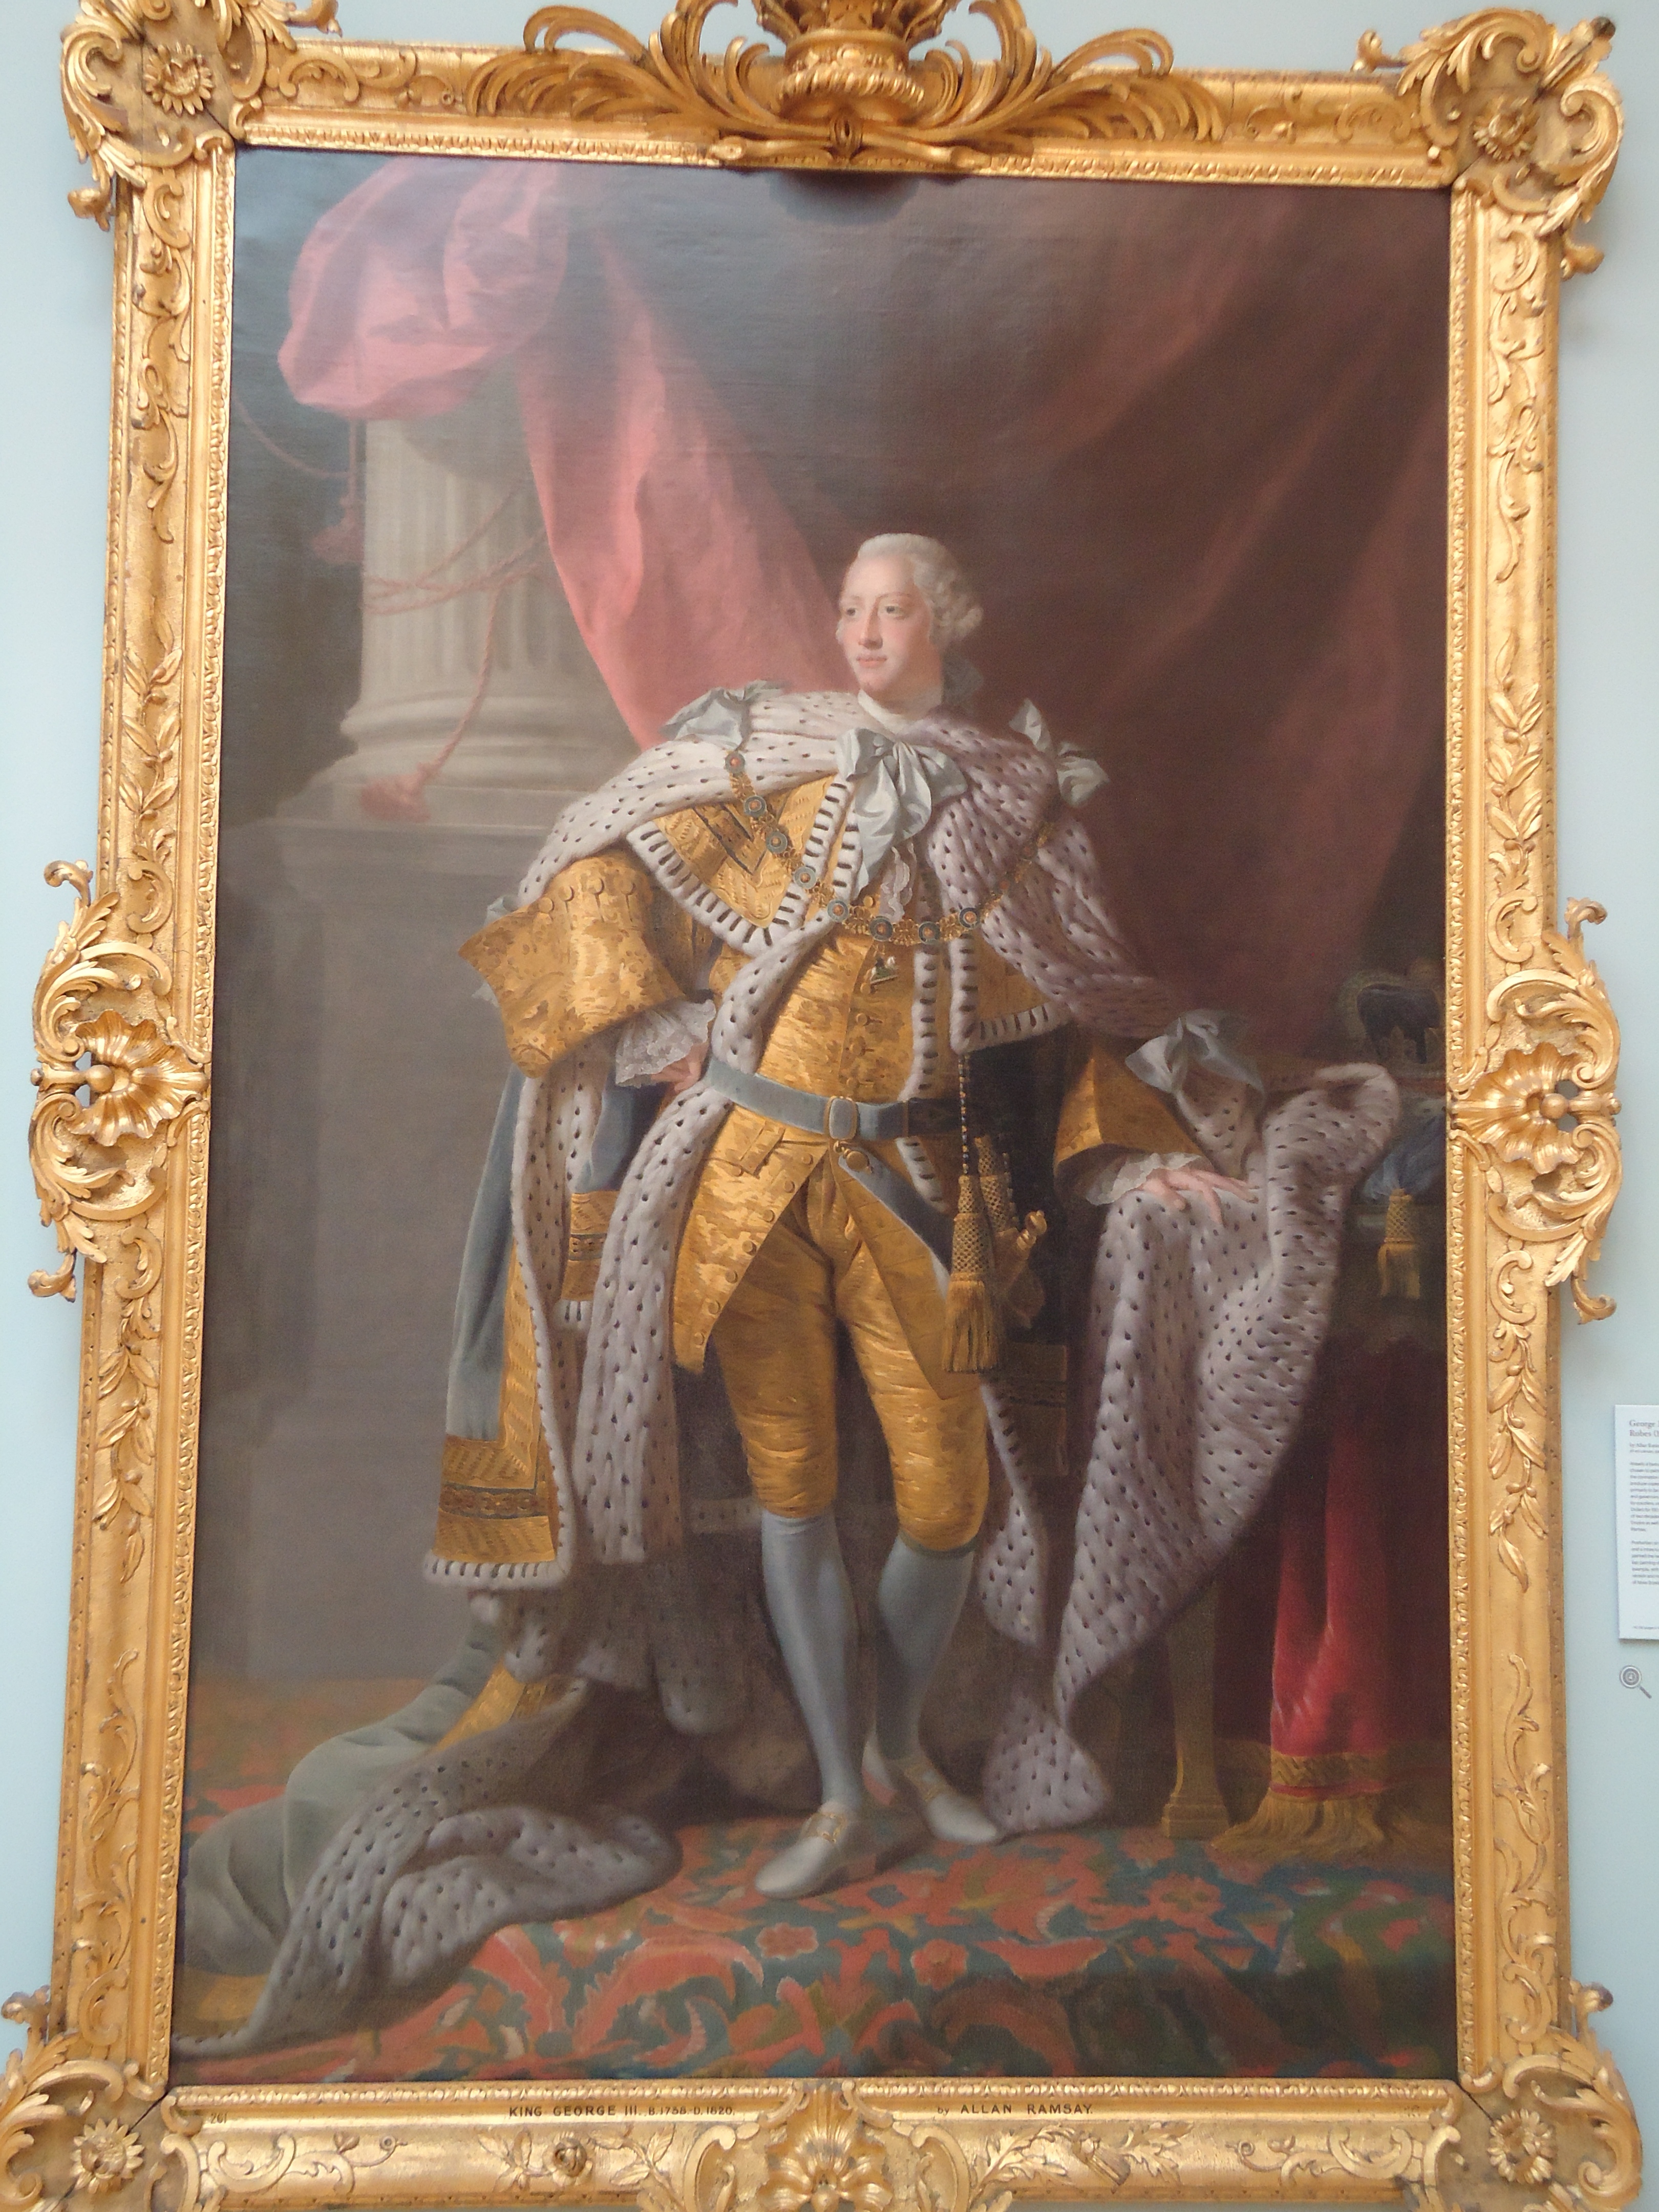 George III by Ramsey c.1763 - HandBound Costume, national portarit gallery of scotland, costume research, a look into goergian court wear, made to measure eighteenth century costume 